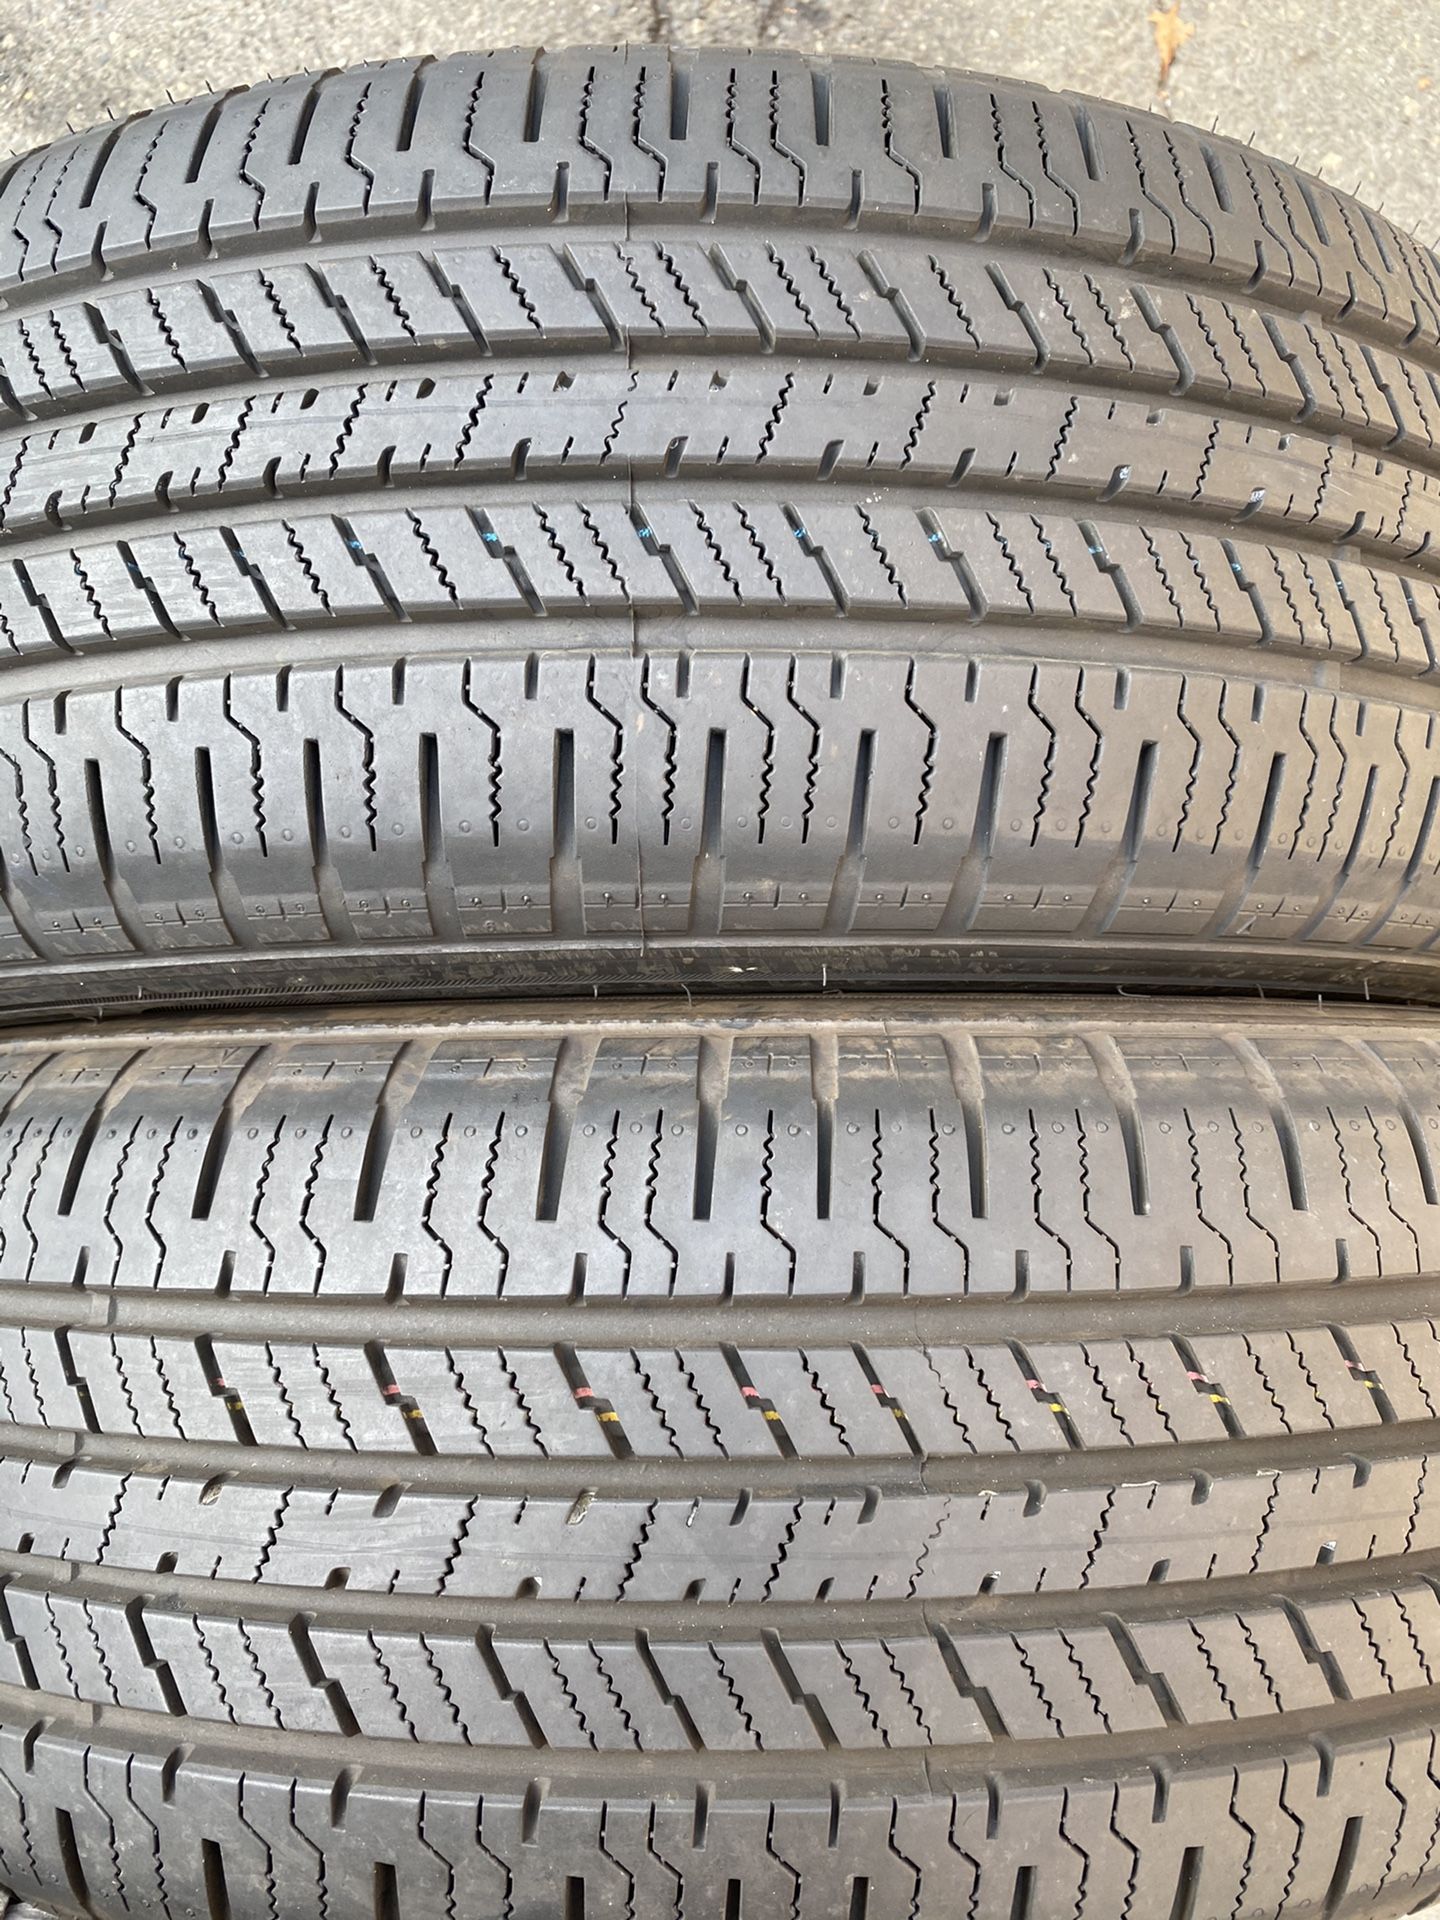 Two used tire 225/65R17 HANKOOK two used tire $70